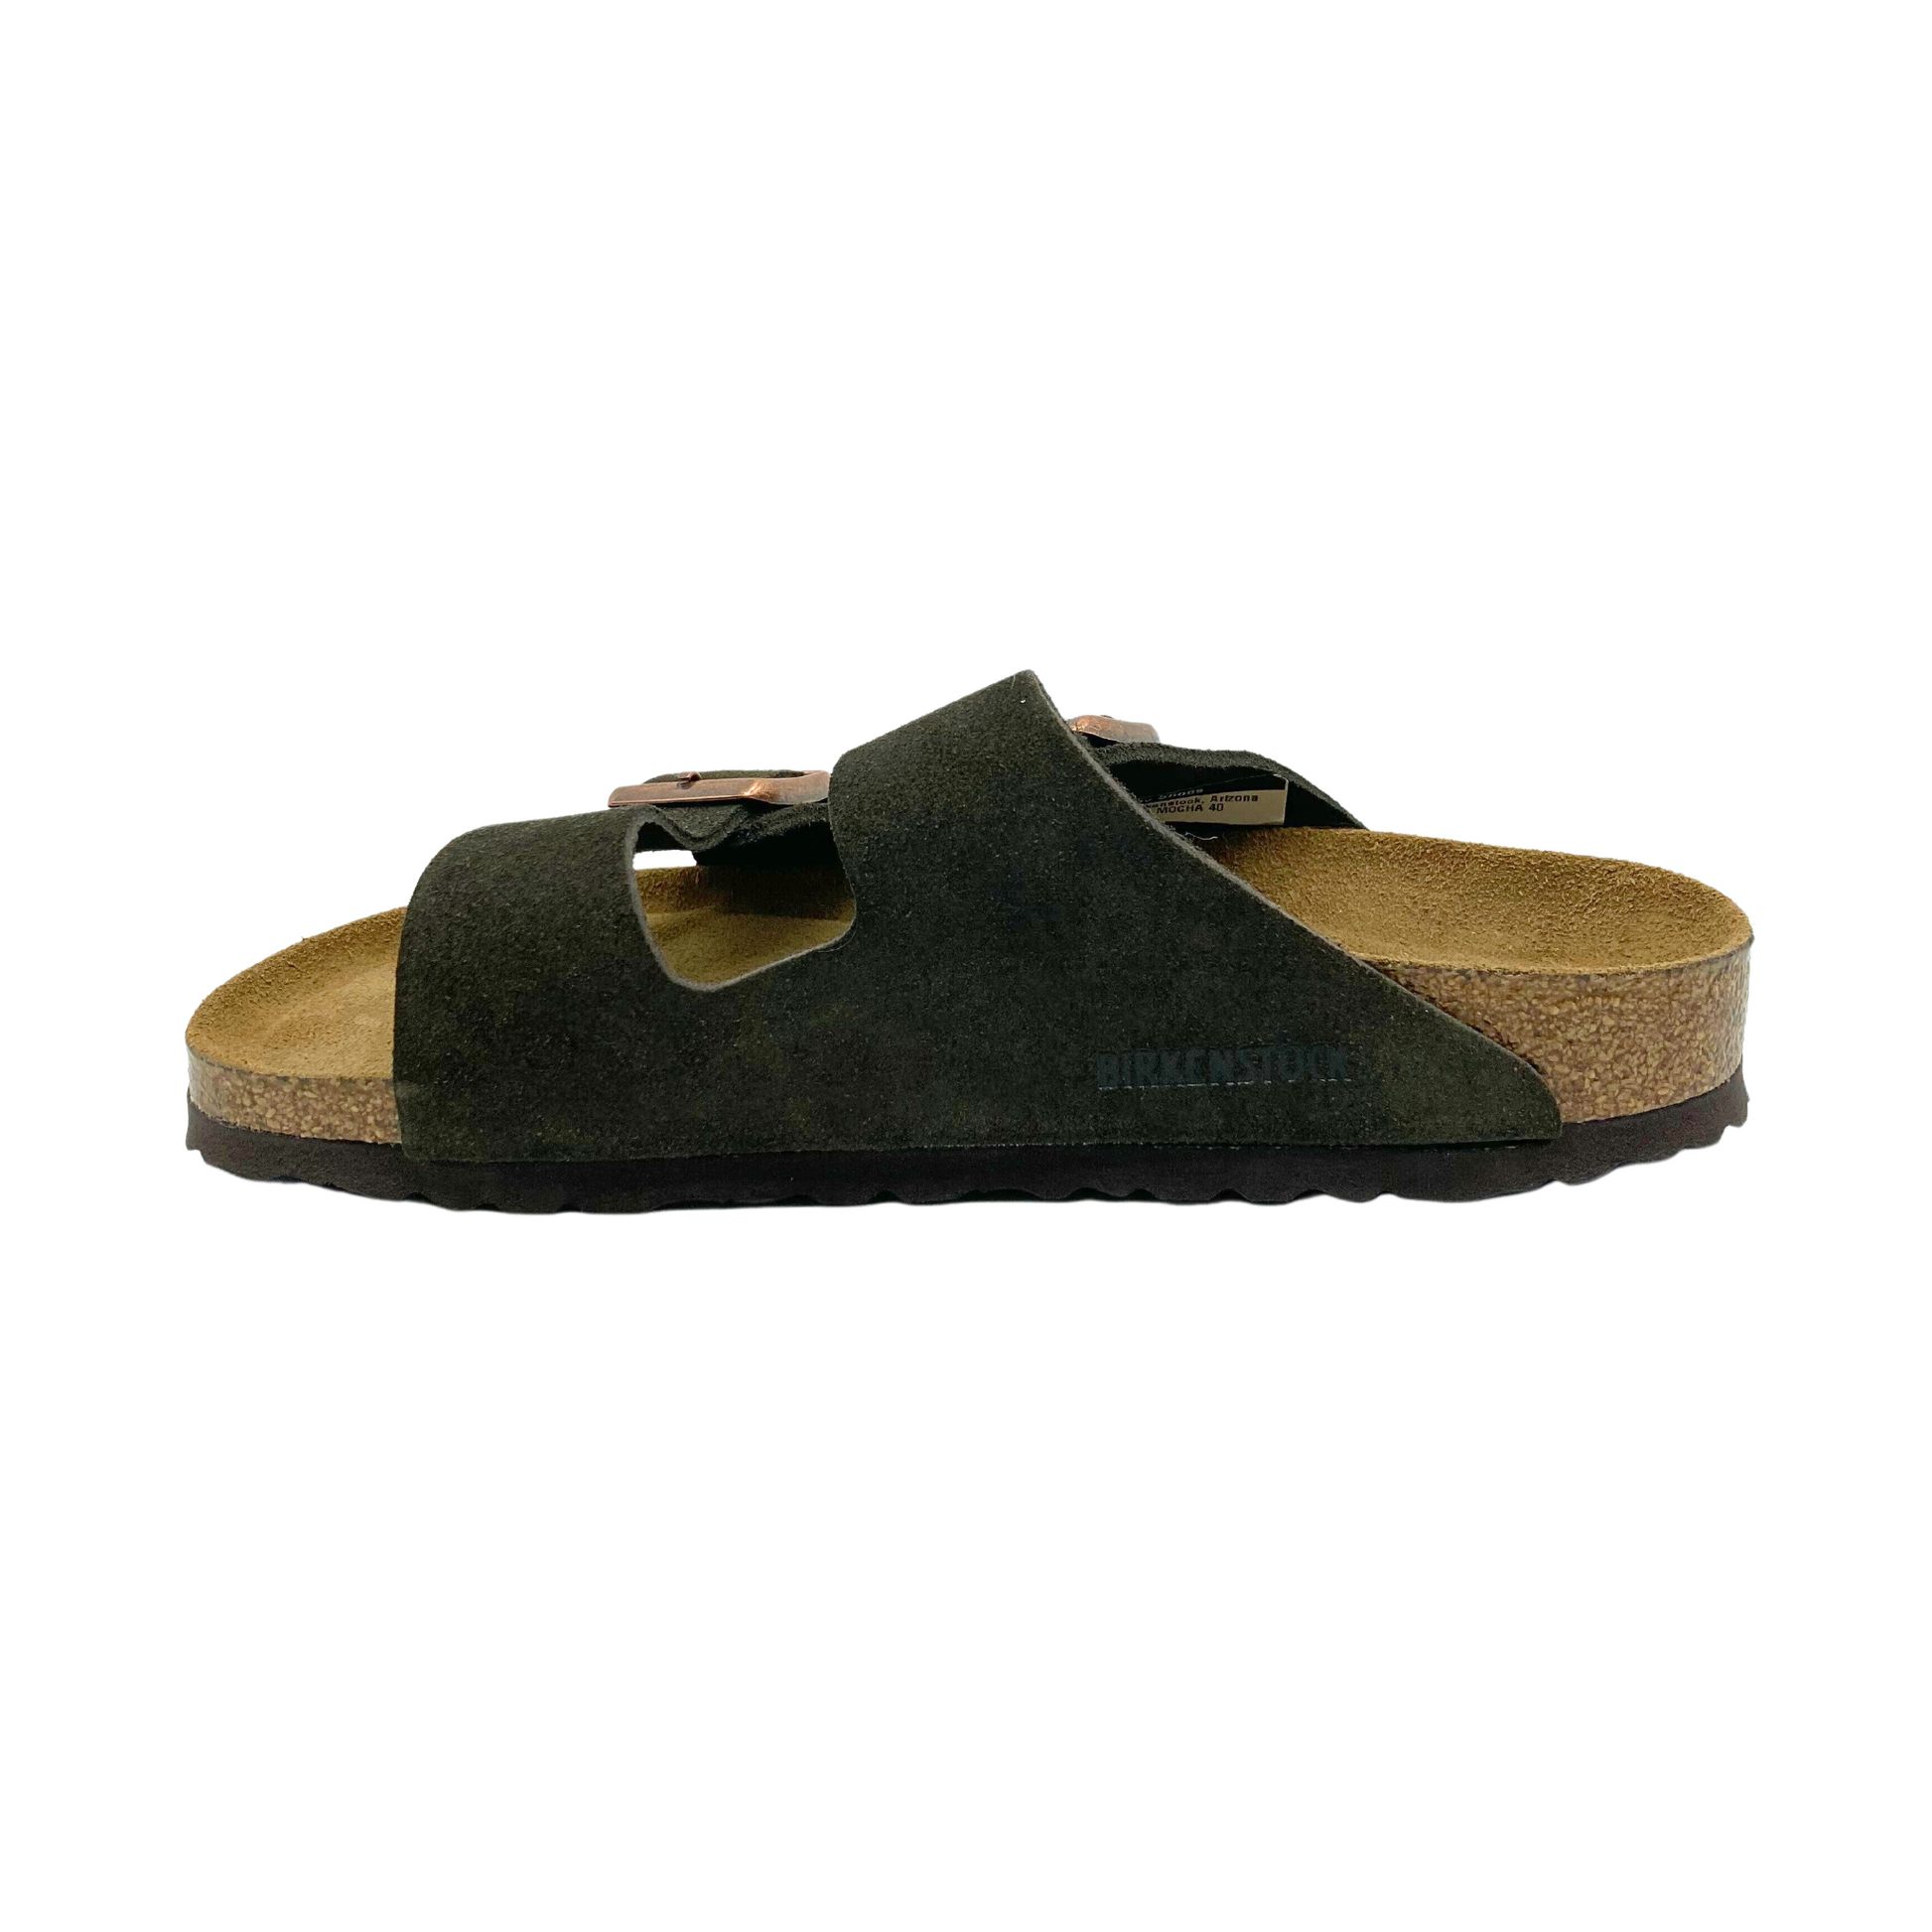 Left facing view of two strap sandal with cushioned footbed